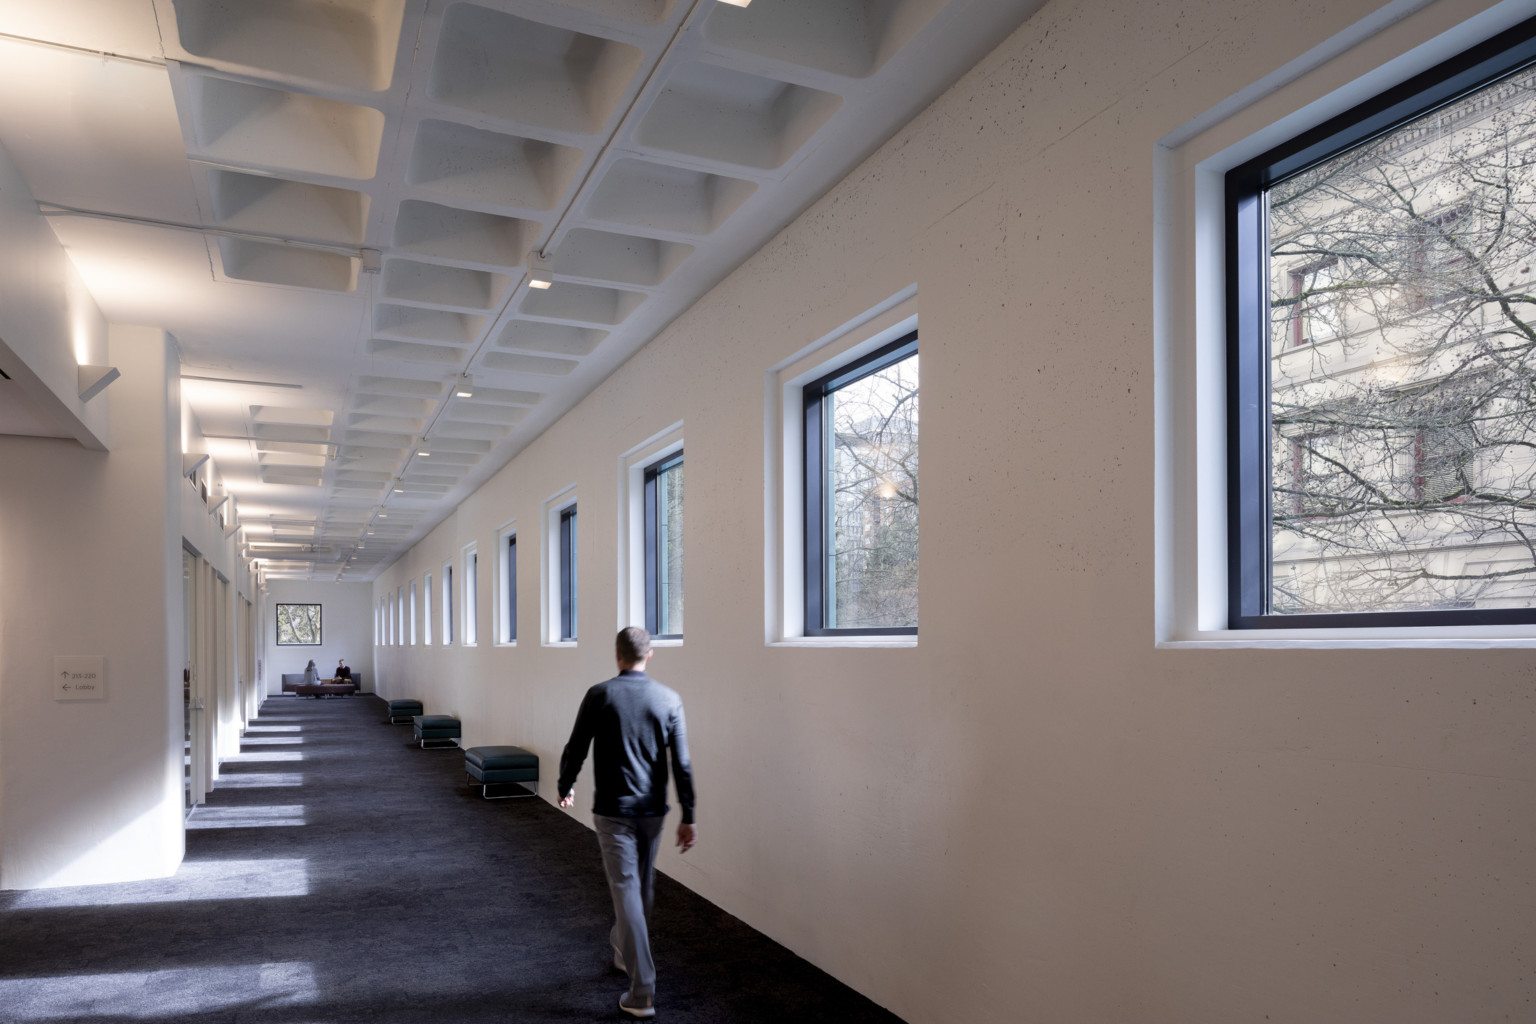 Tall white waffle slab ceiling over a perimeter corridor lined with square windows